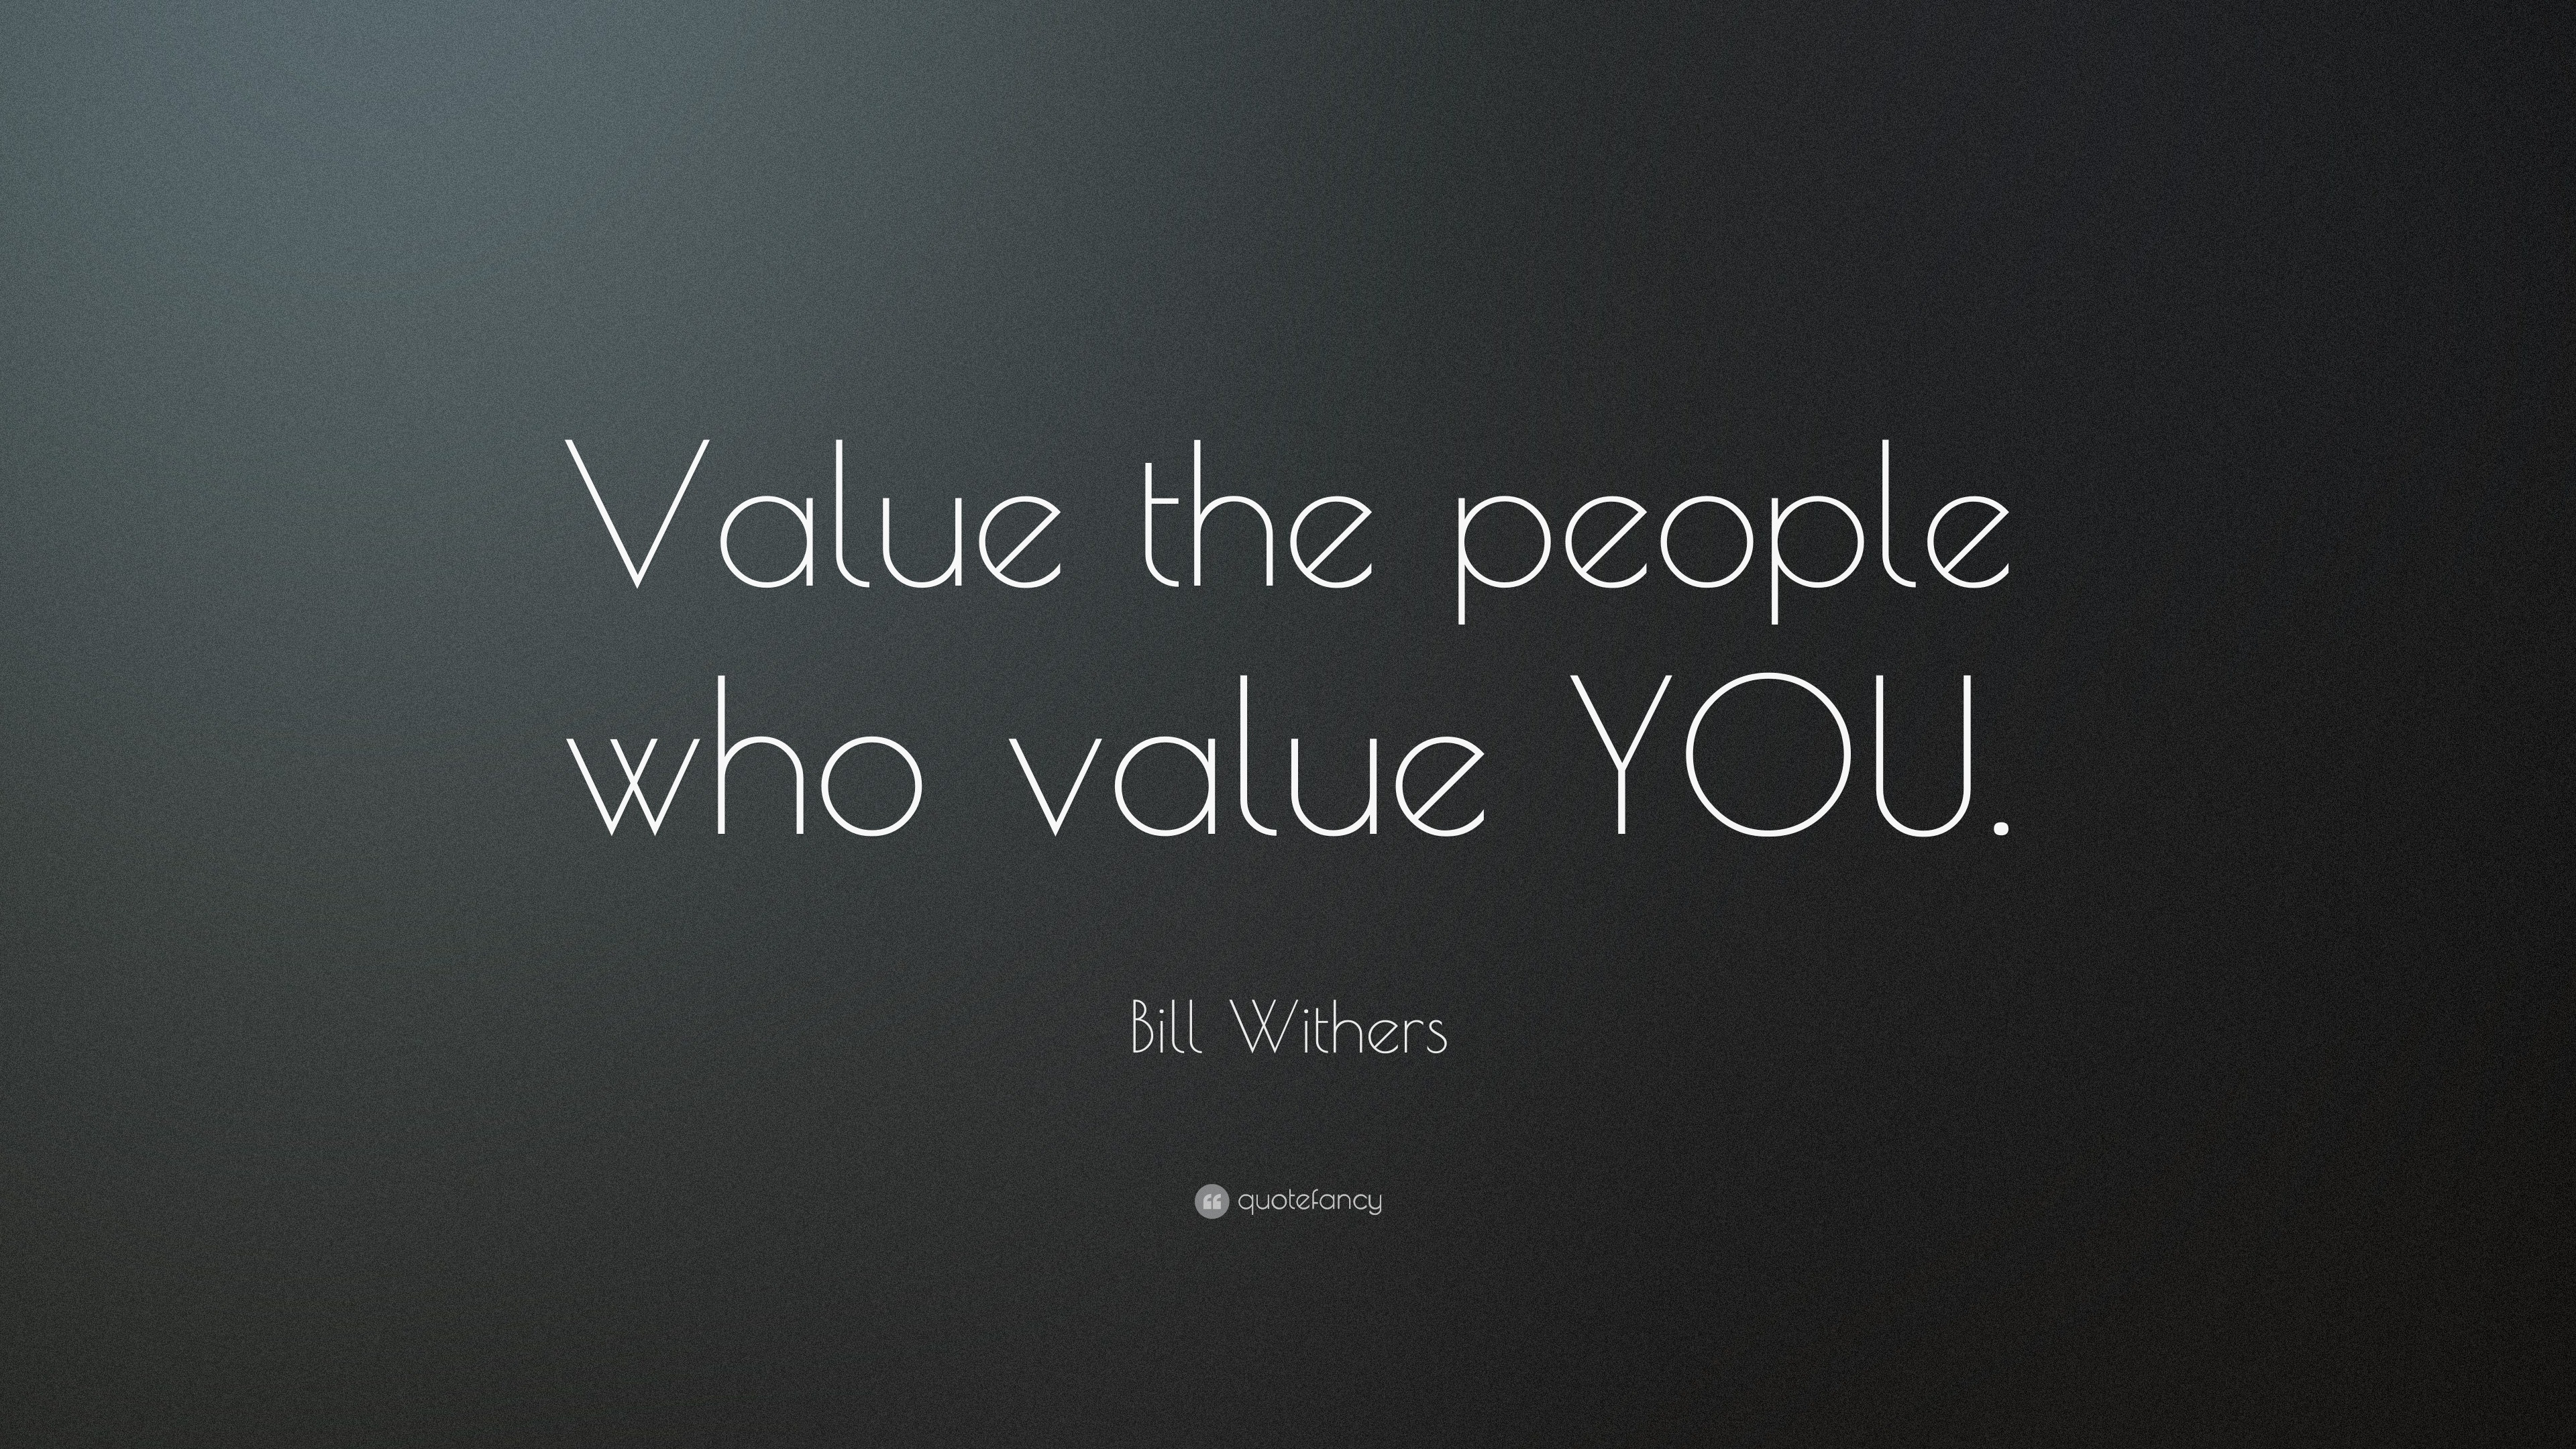 Bill Withers Quote: “Value the people who value YOU.”